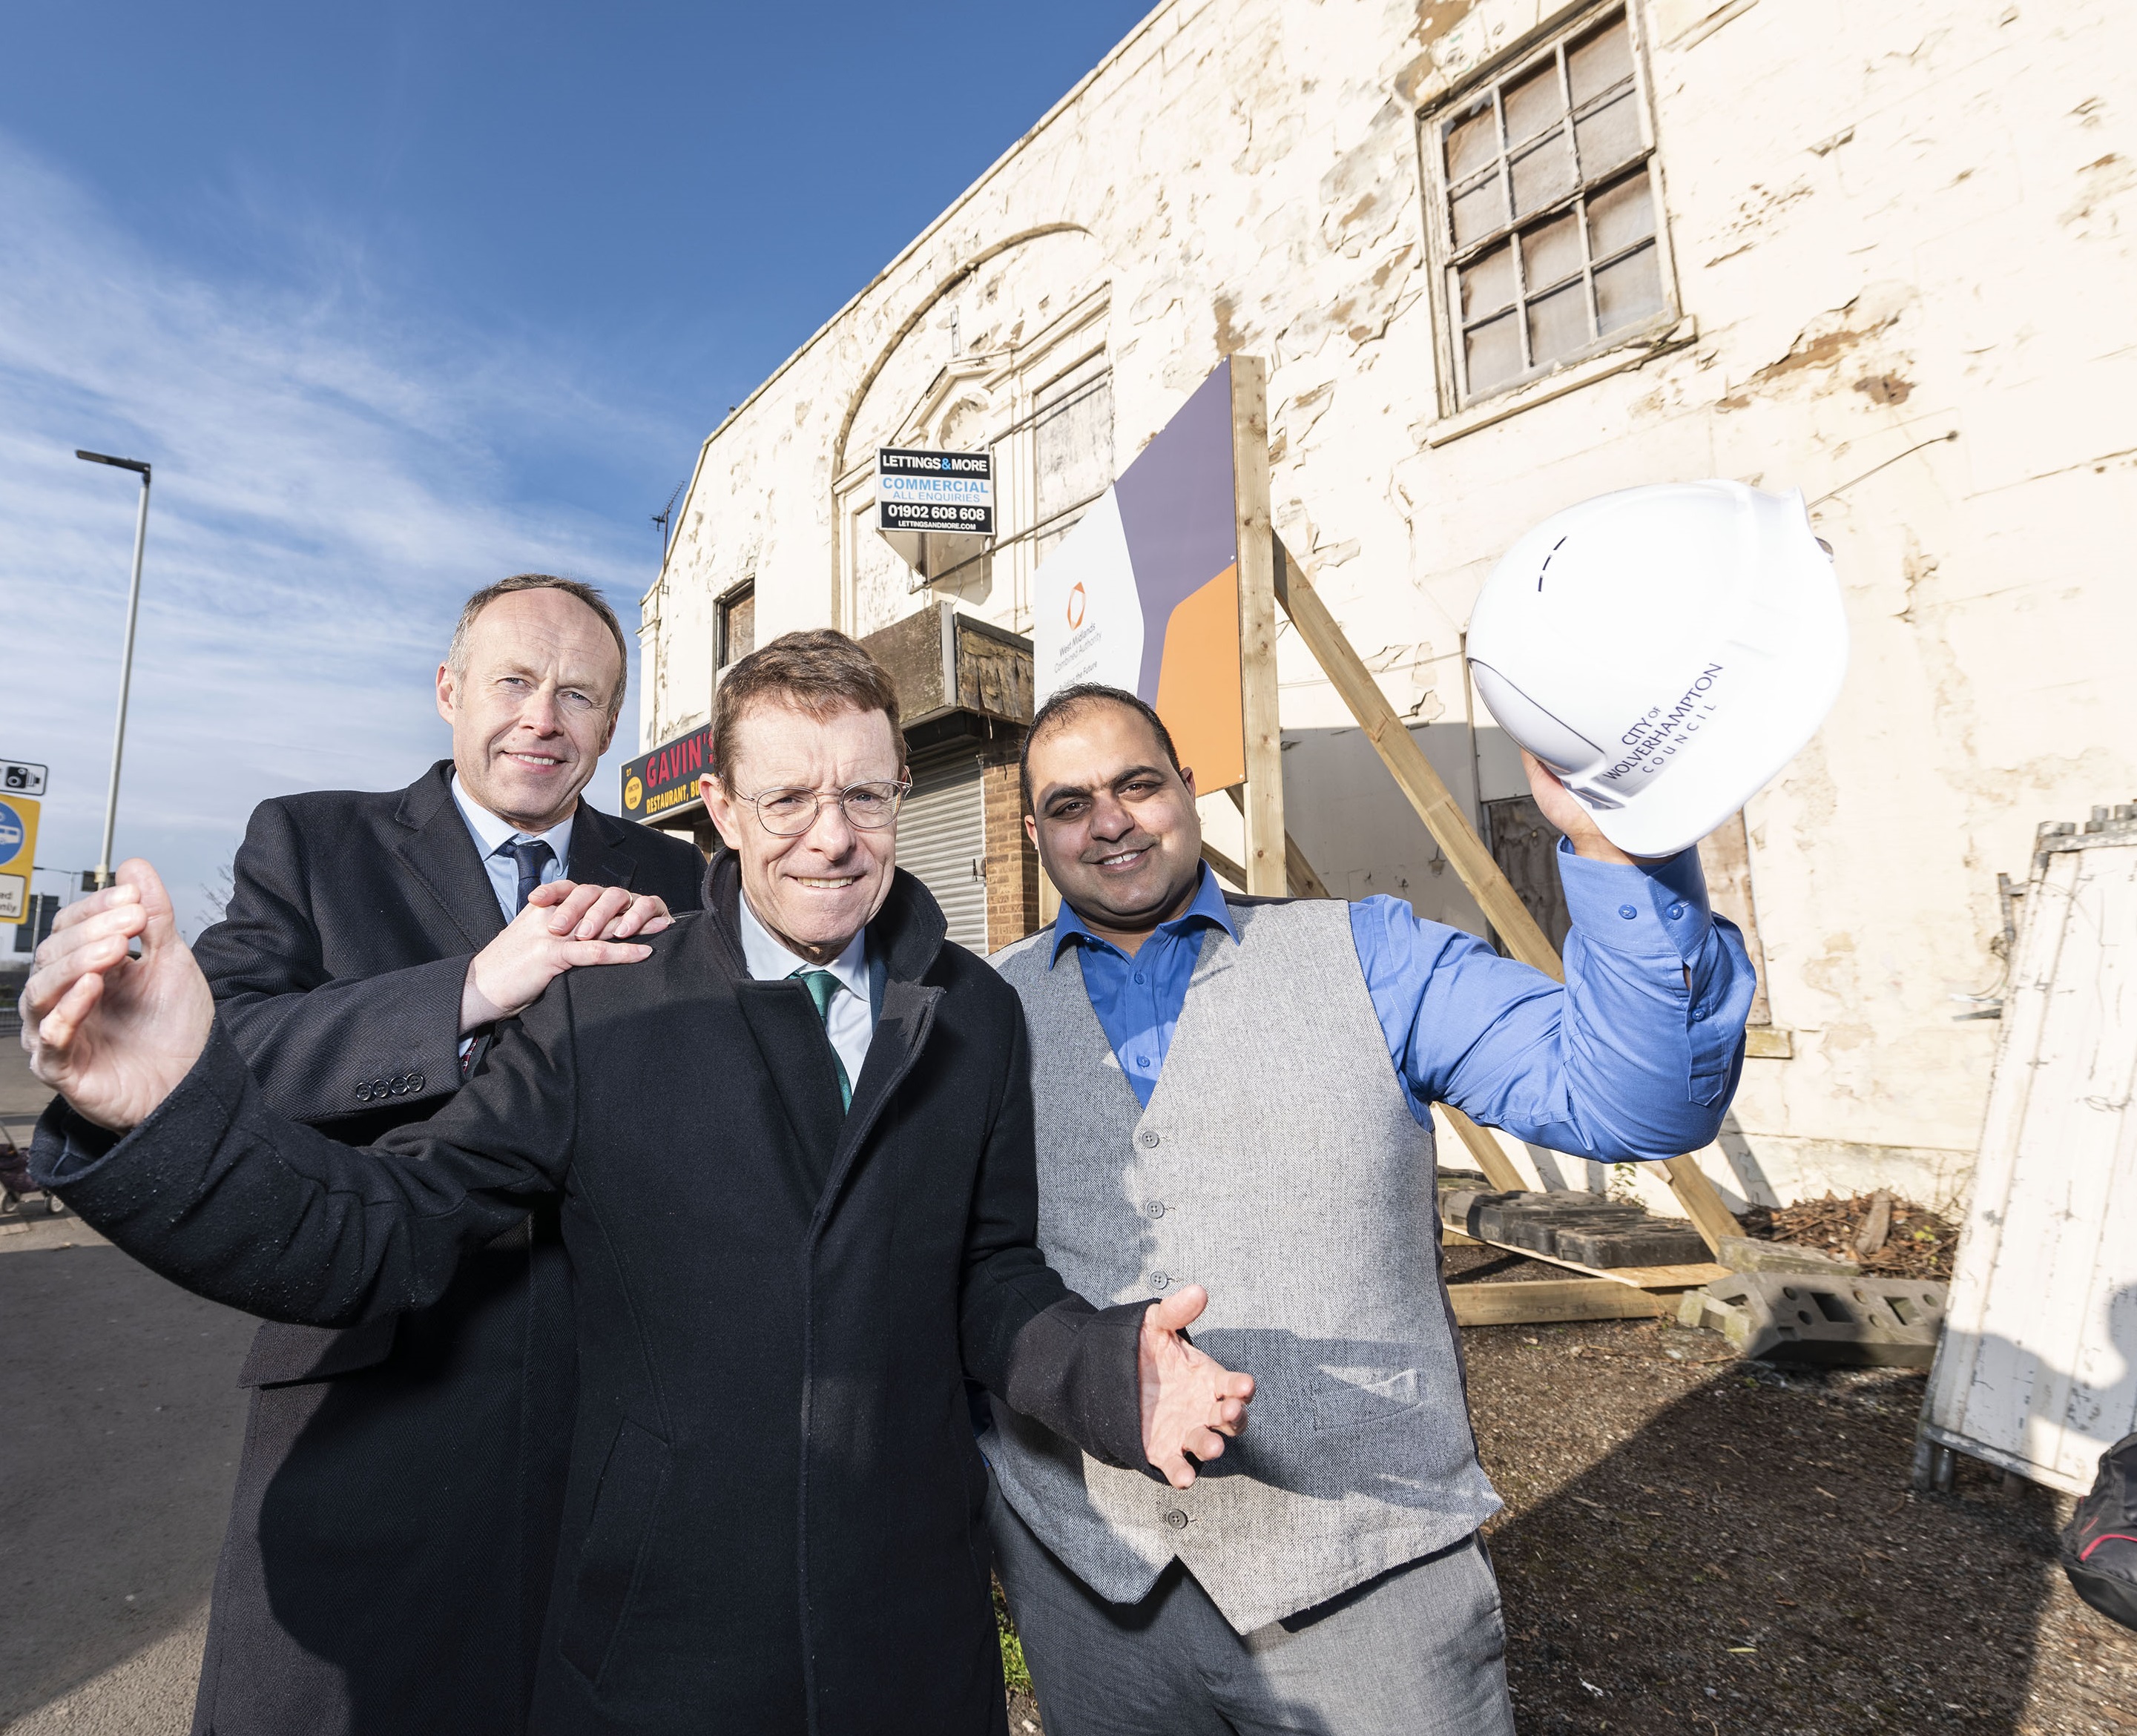 From left: Jon Bramwell, chair of the Regional Town Centre Taskforce and a managing director at HSBC Commercial Banking, Mayor of the West Midlands Andy Street and Cllr Harman Banger, cabinet member for city economy at City of Wolverhampton Council outside the derelict Pipe Hall